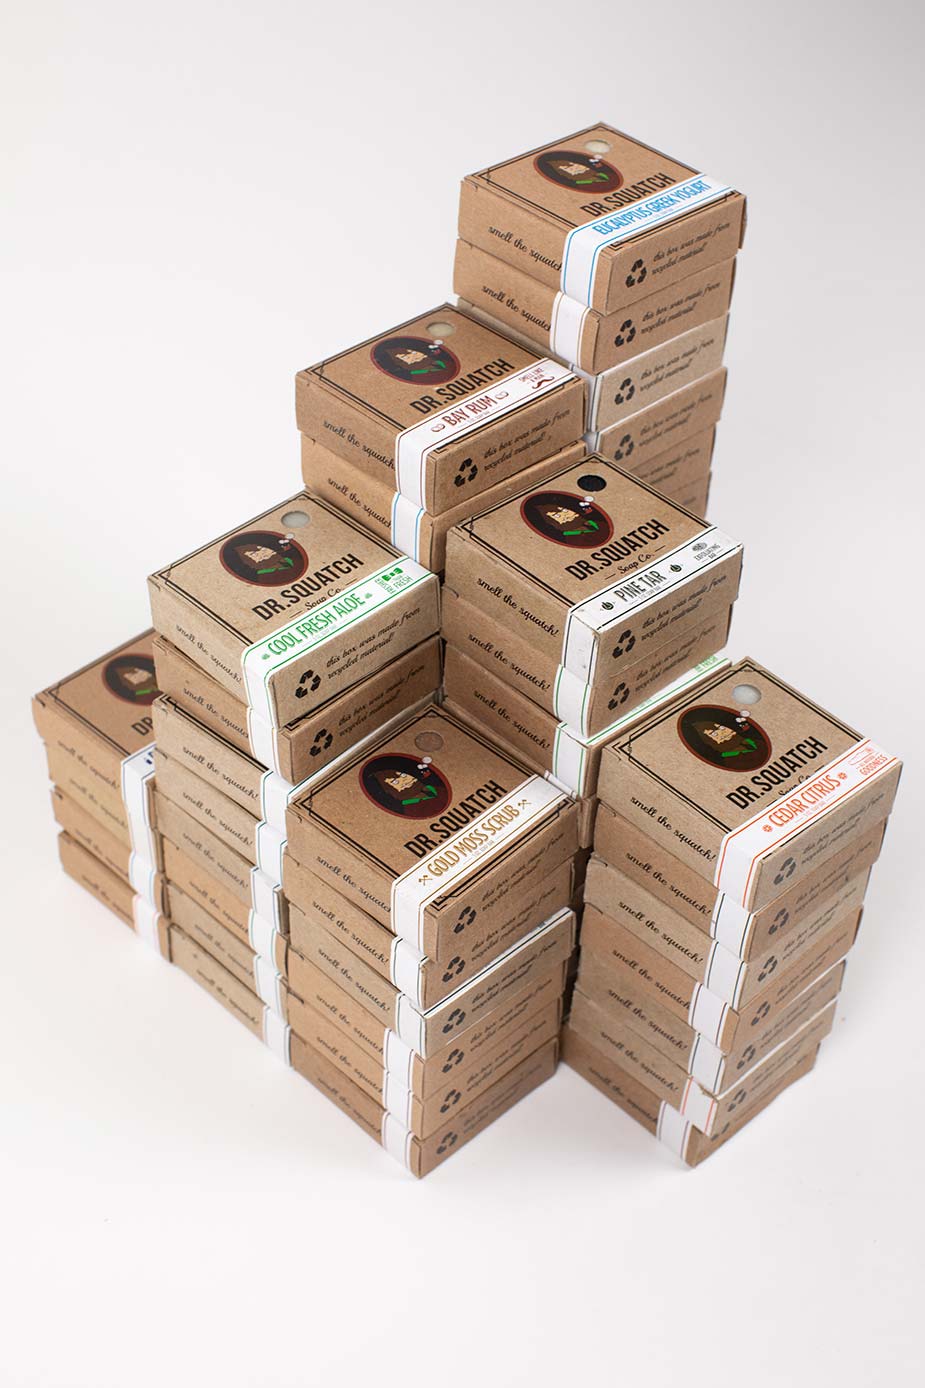 isometric view of stacks of Dr. Squatch soap bars on a light gray studio background